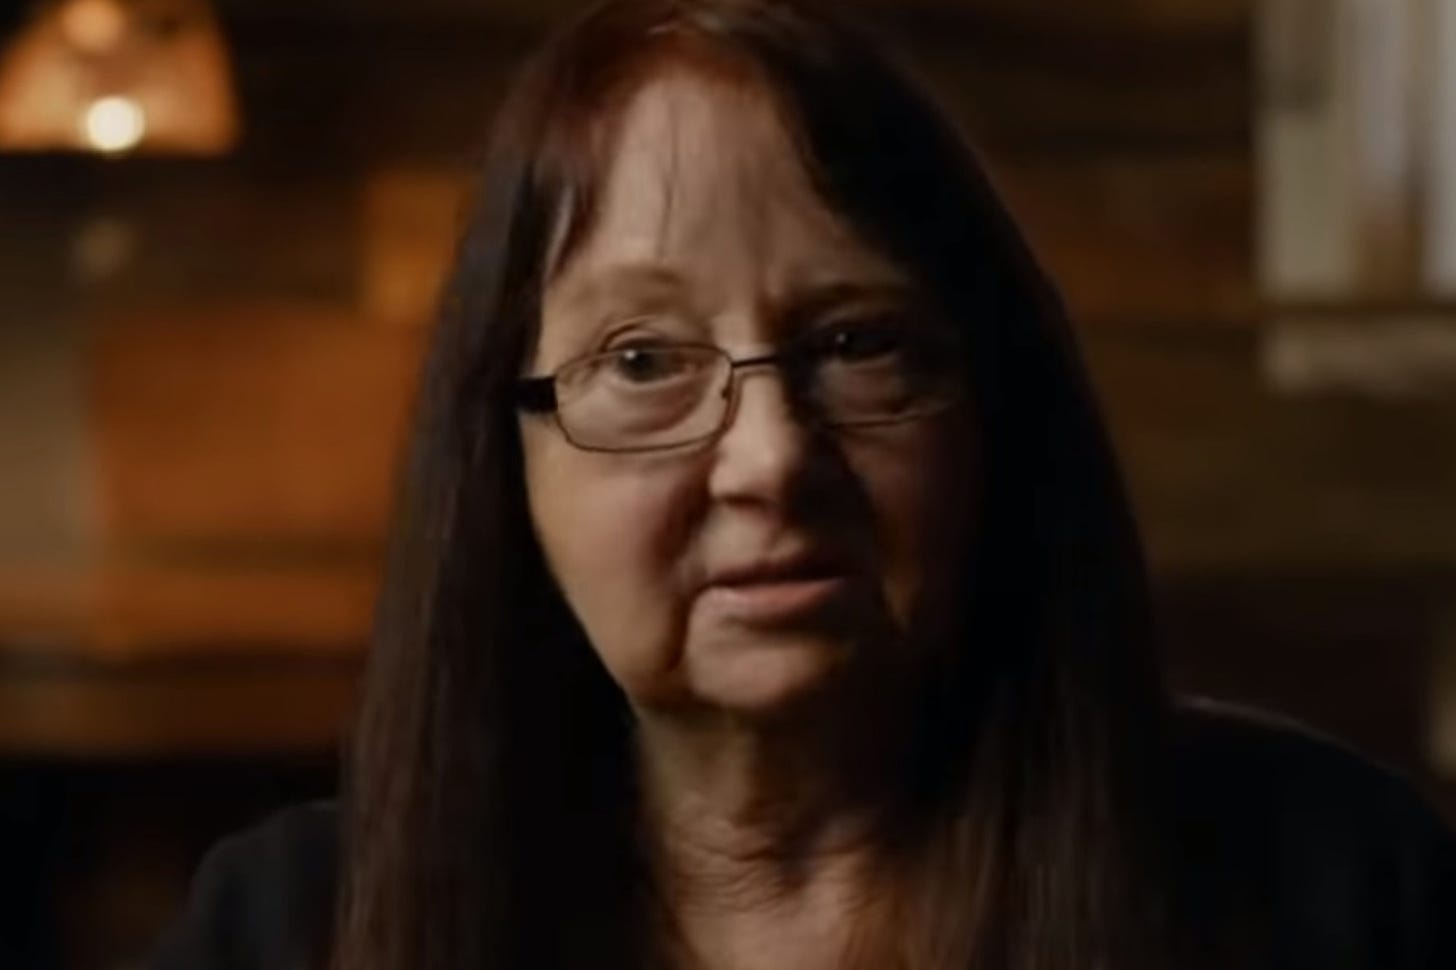 Lynette 'Squeaky' Fromme: I'm still in love with Charles Manson